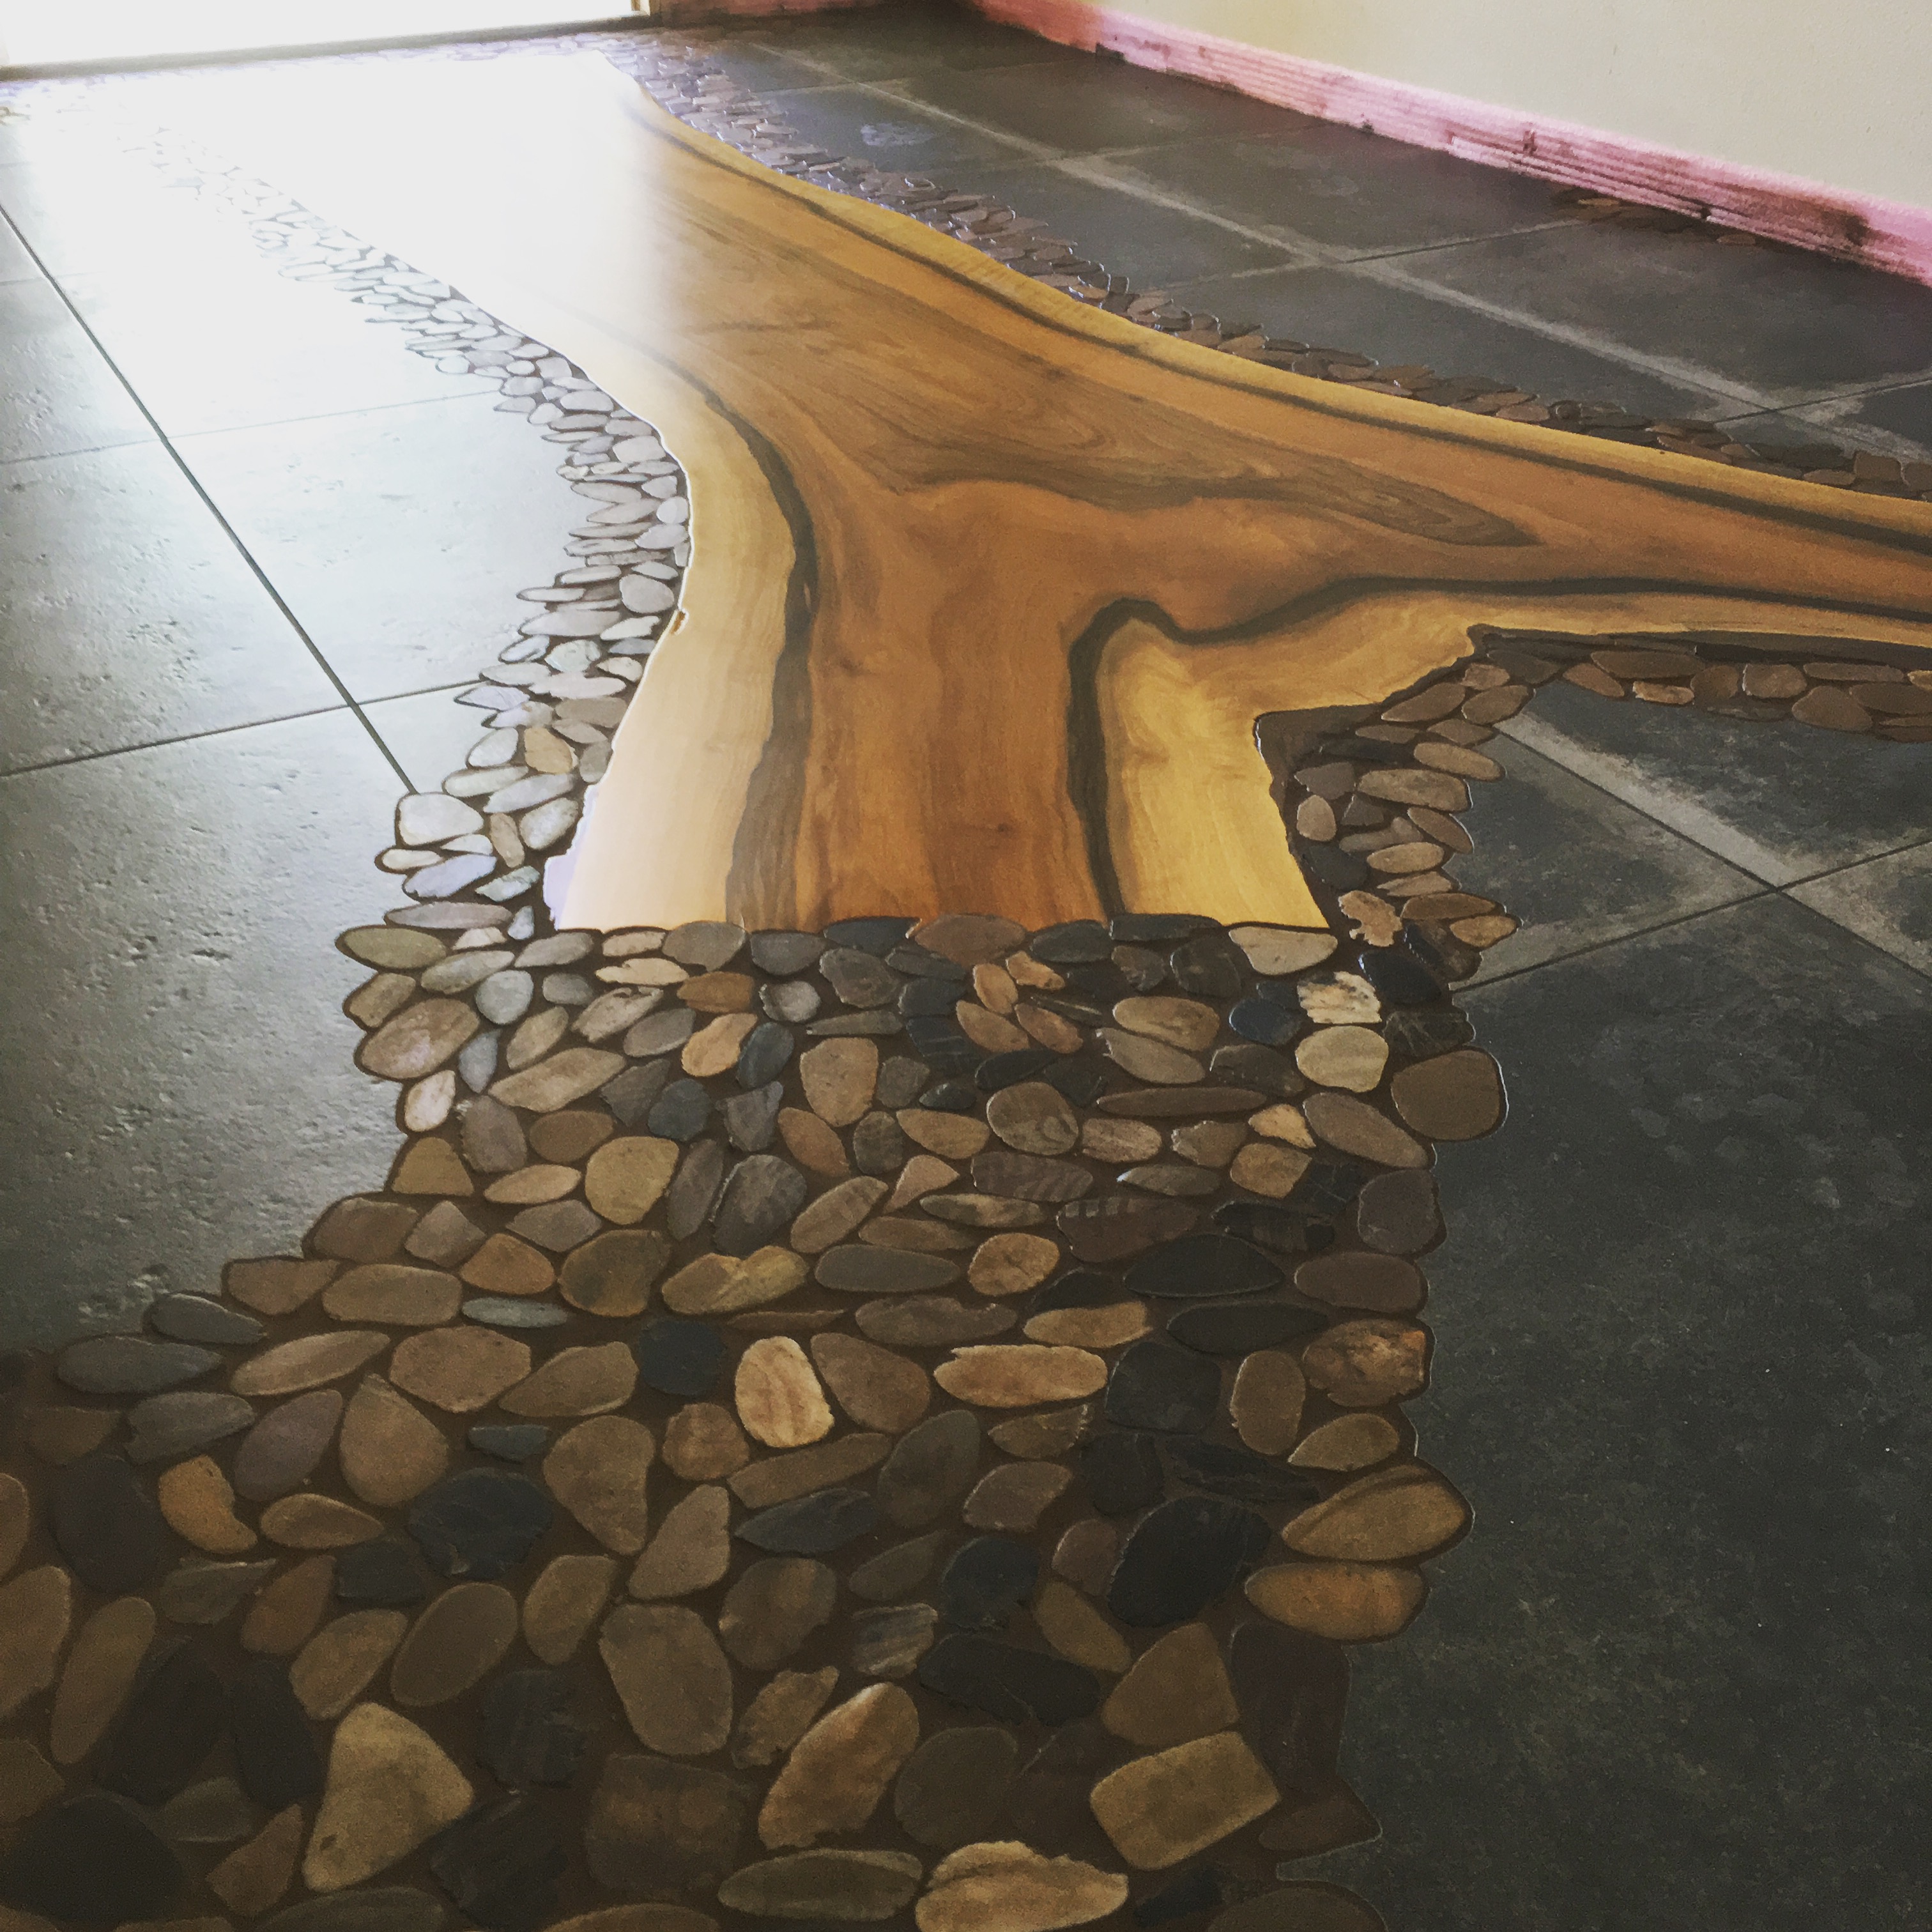 McDaniel said his greatest scribing challenge was installing pebble mosaics around a large piece of walnut in an entryway.